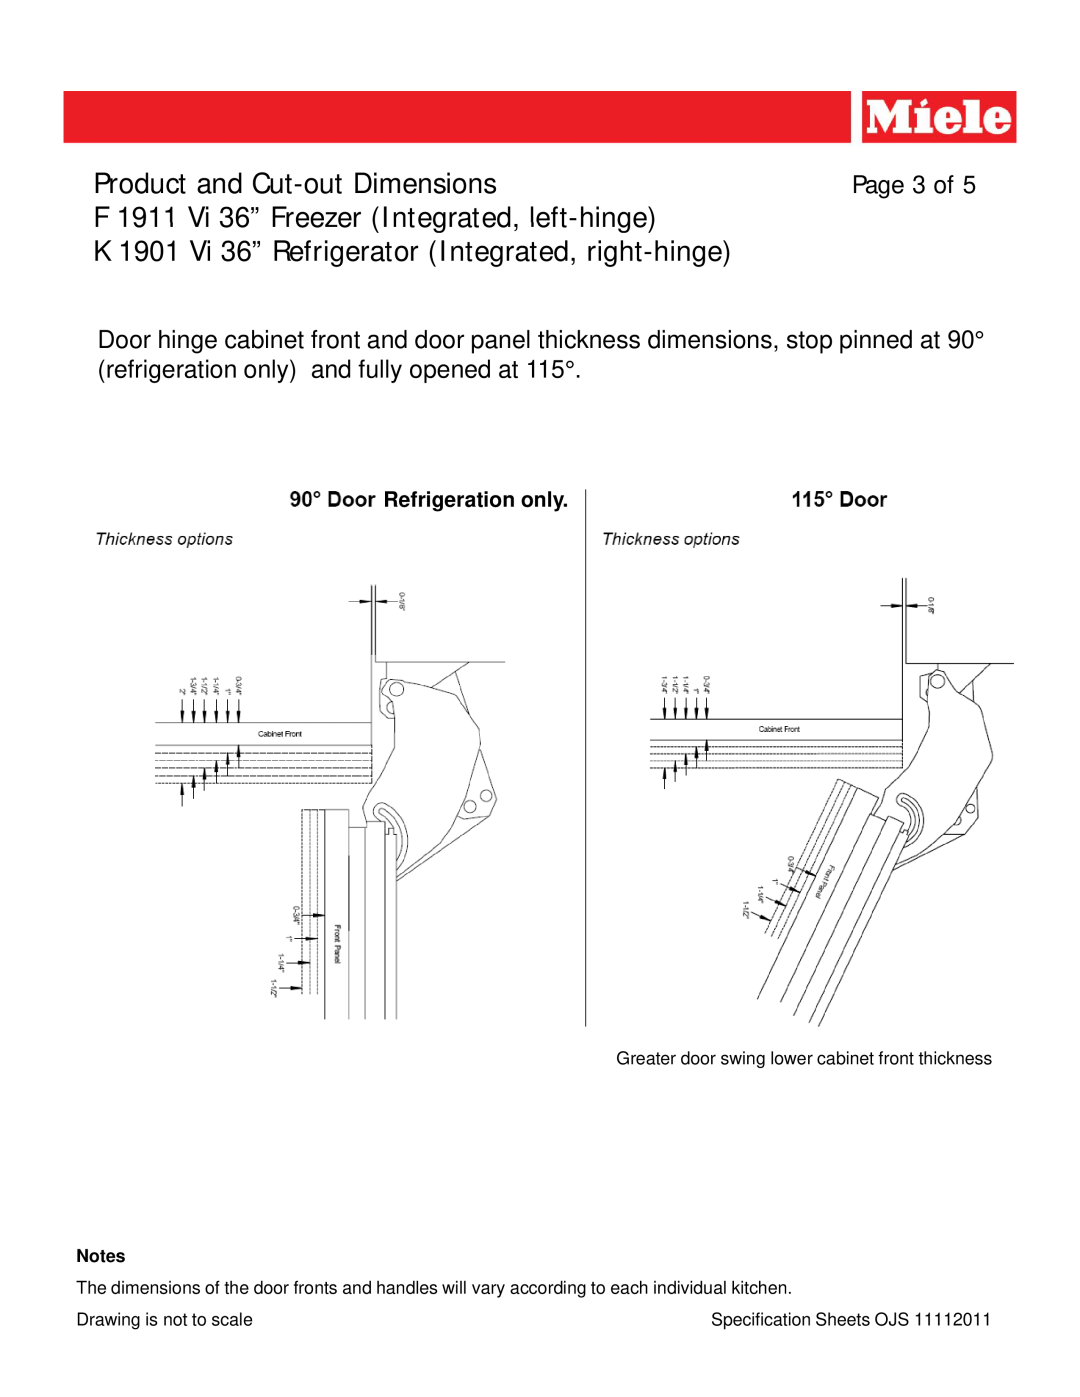 Miele K 1901 VI 36 dimensions Page 3 of, Greater door swing lower cabinet front thickness, Product and Cut-outDimensions 